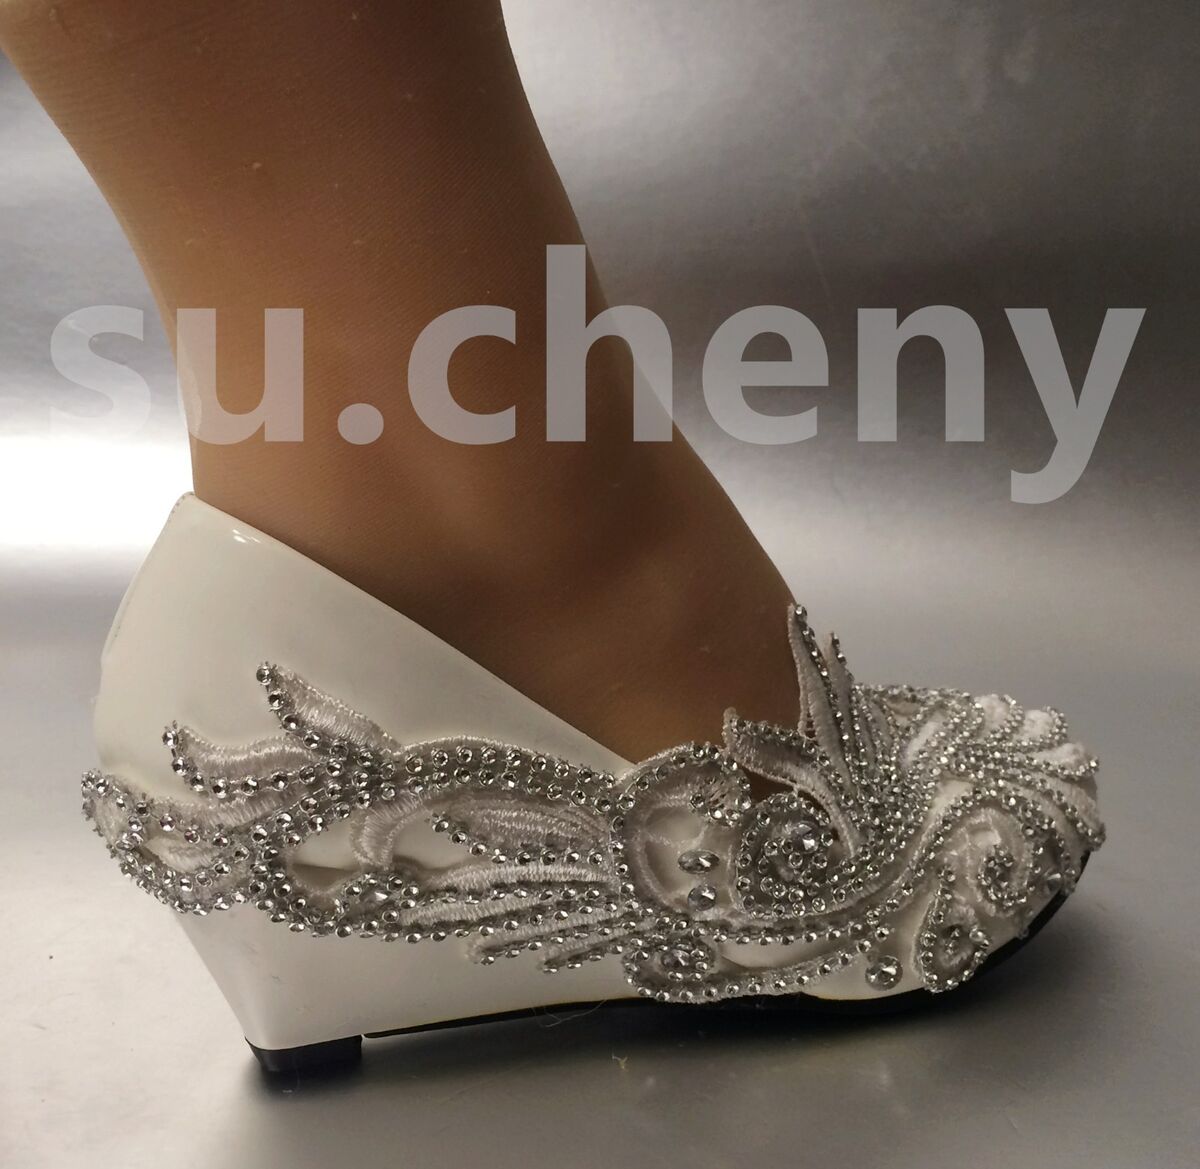 Wedge low high heels Lace crystal white ivory pump Wedding Bridal shoes | eBay